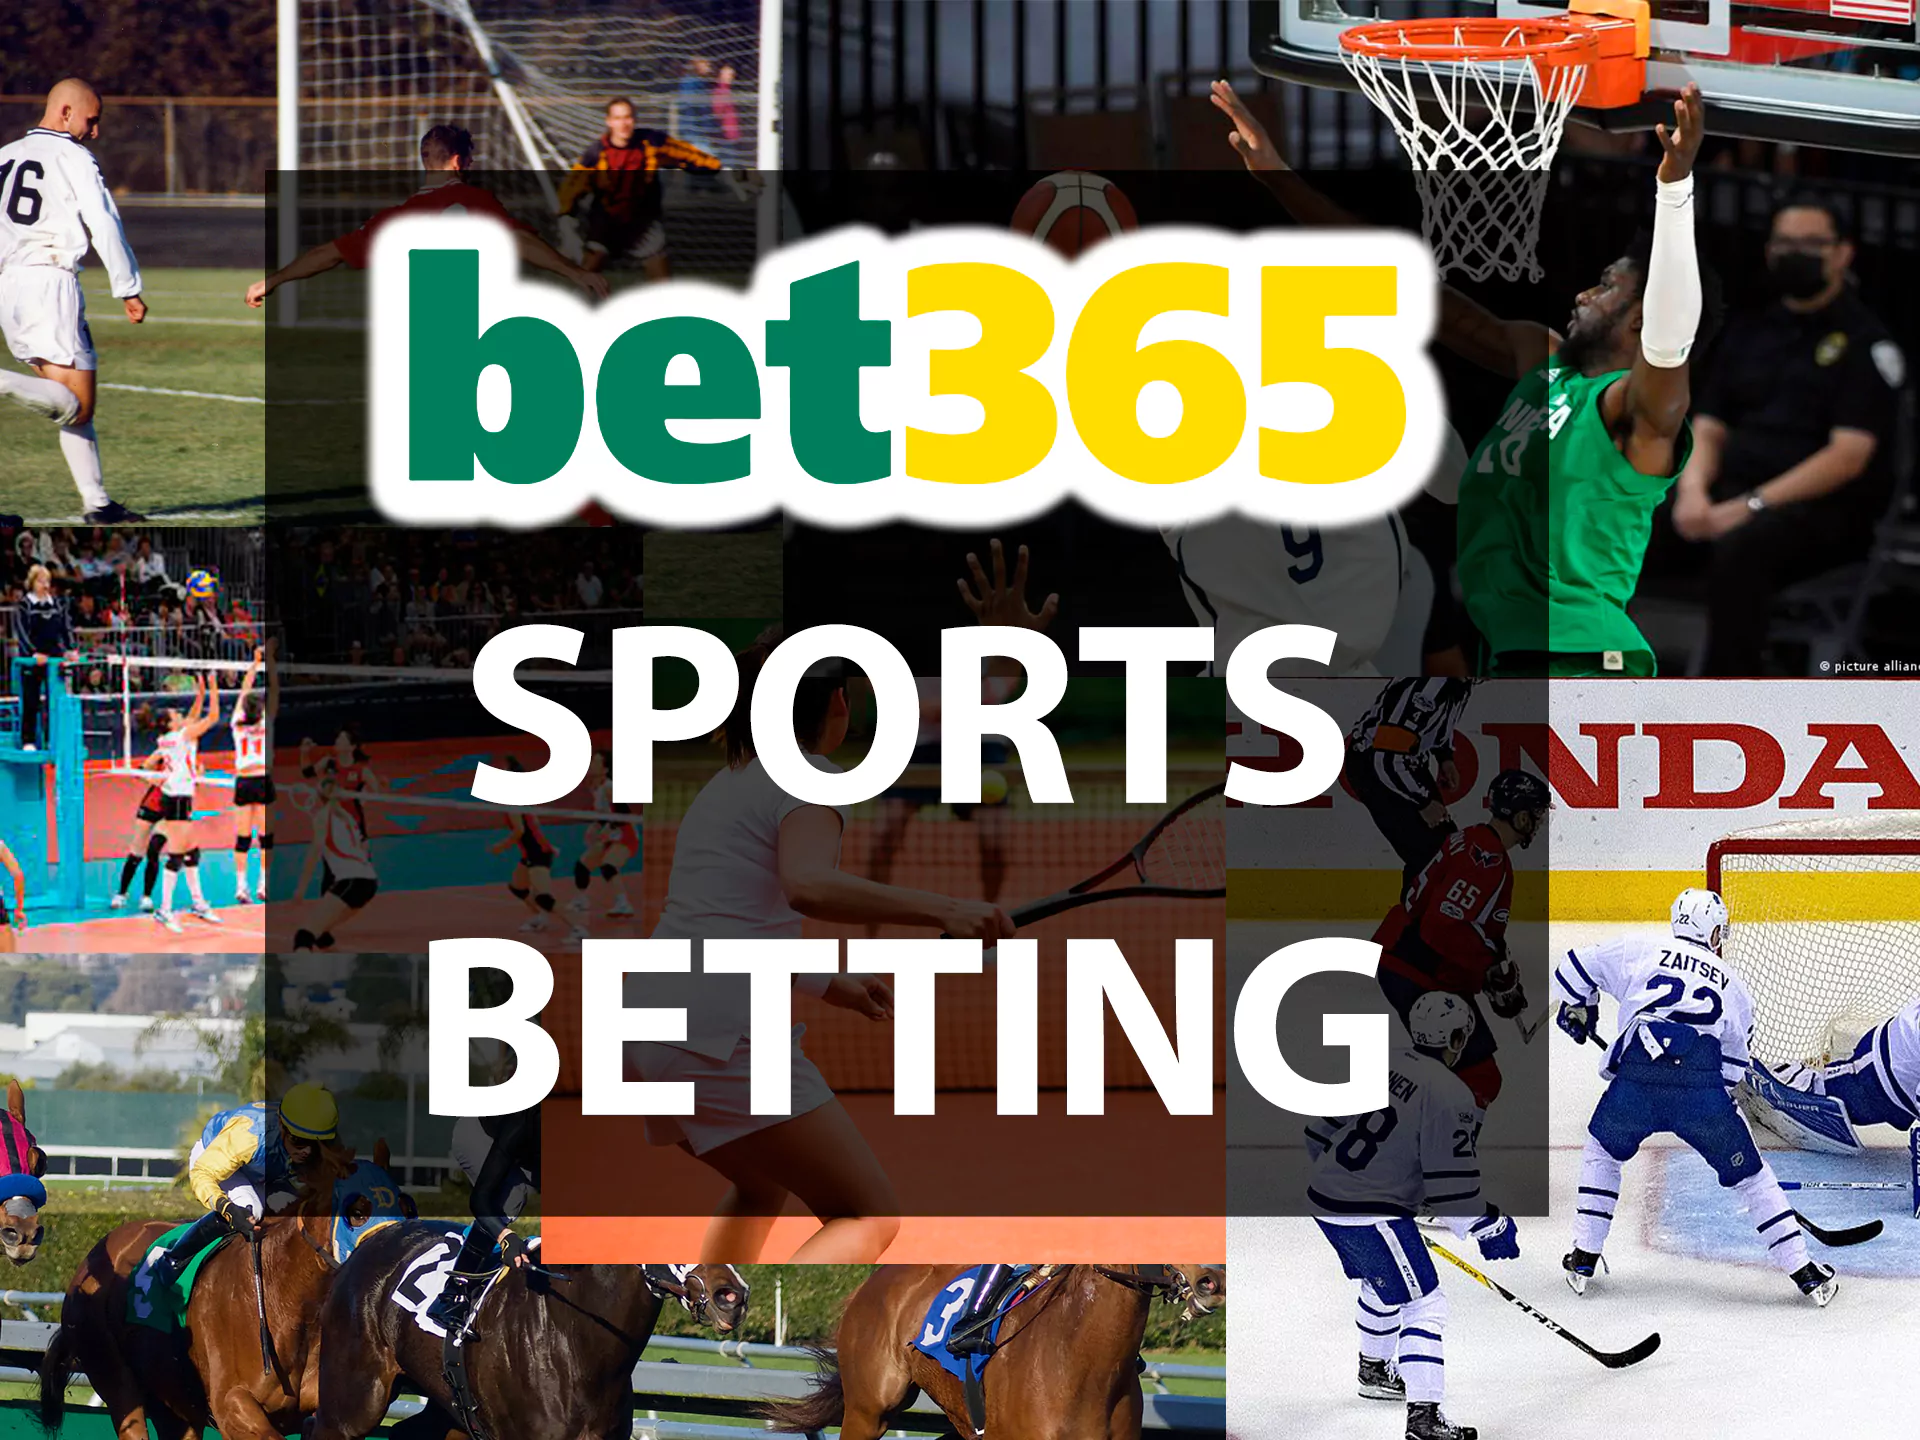 You can also bet on soccer, vollayball, tennis and other sports disciplines.